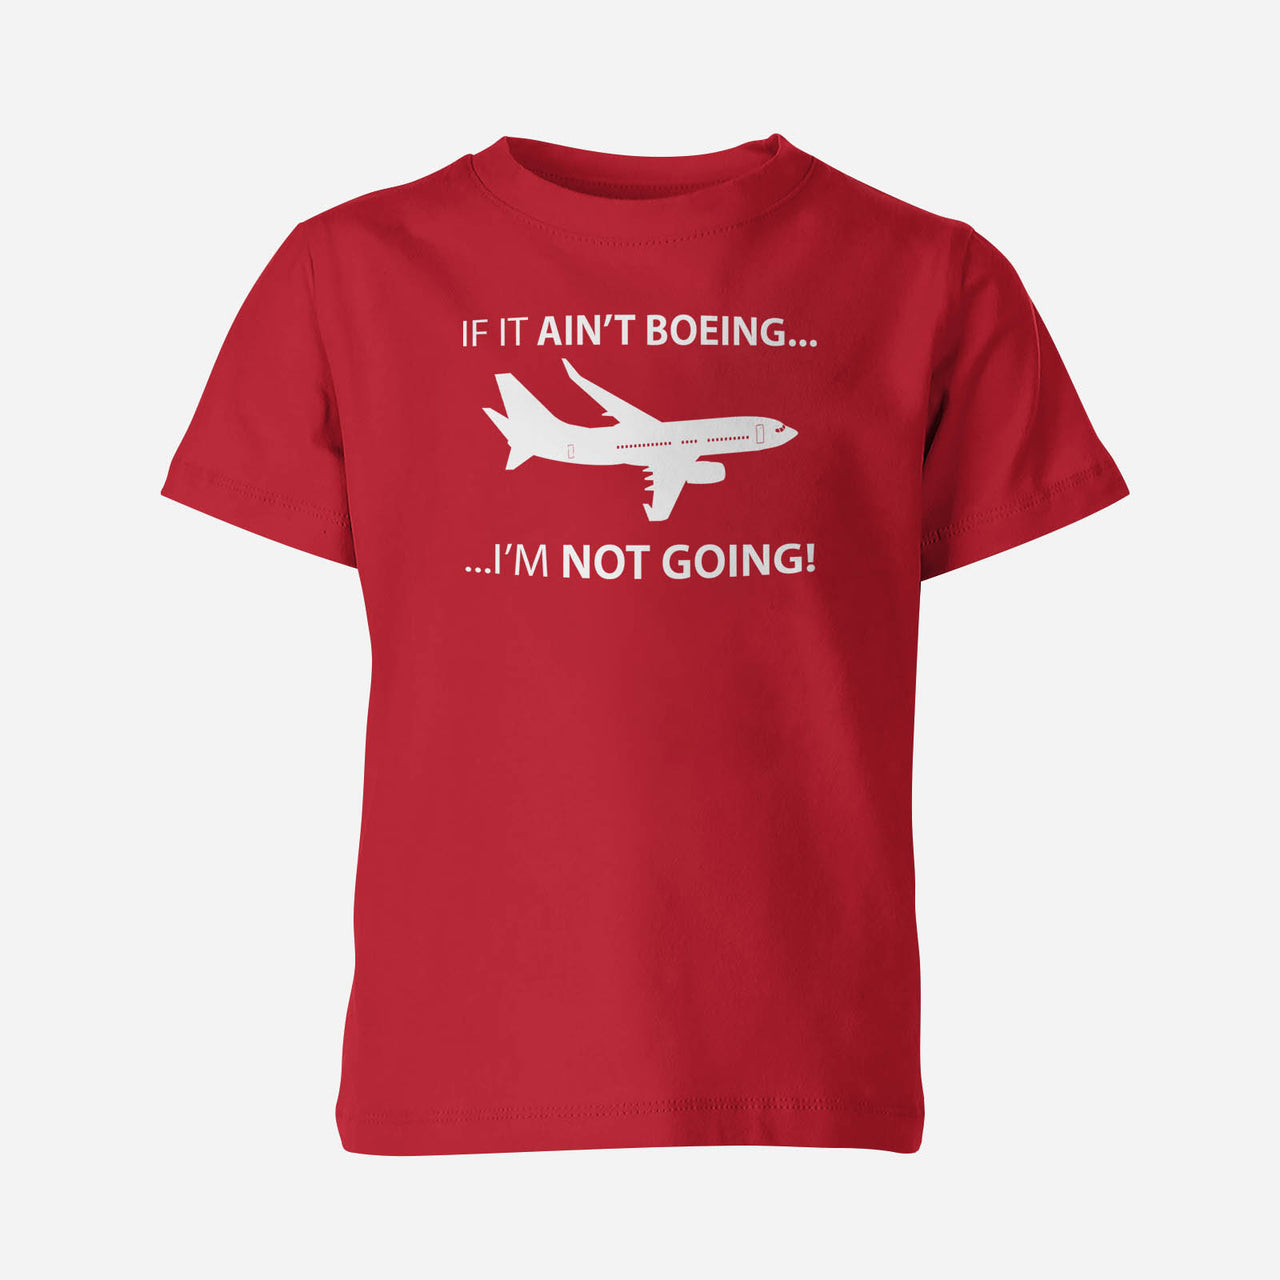 If It Ain't Boeing I'm Not Going! Designed Children T-Shirts